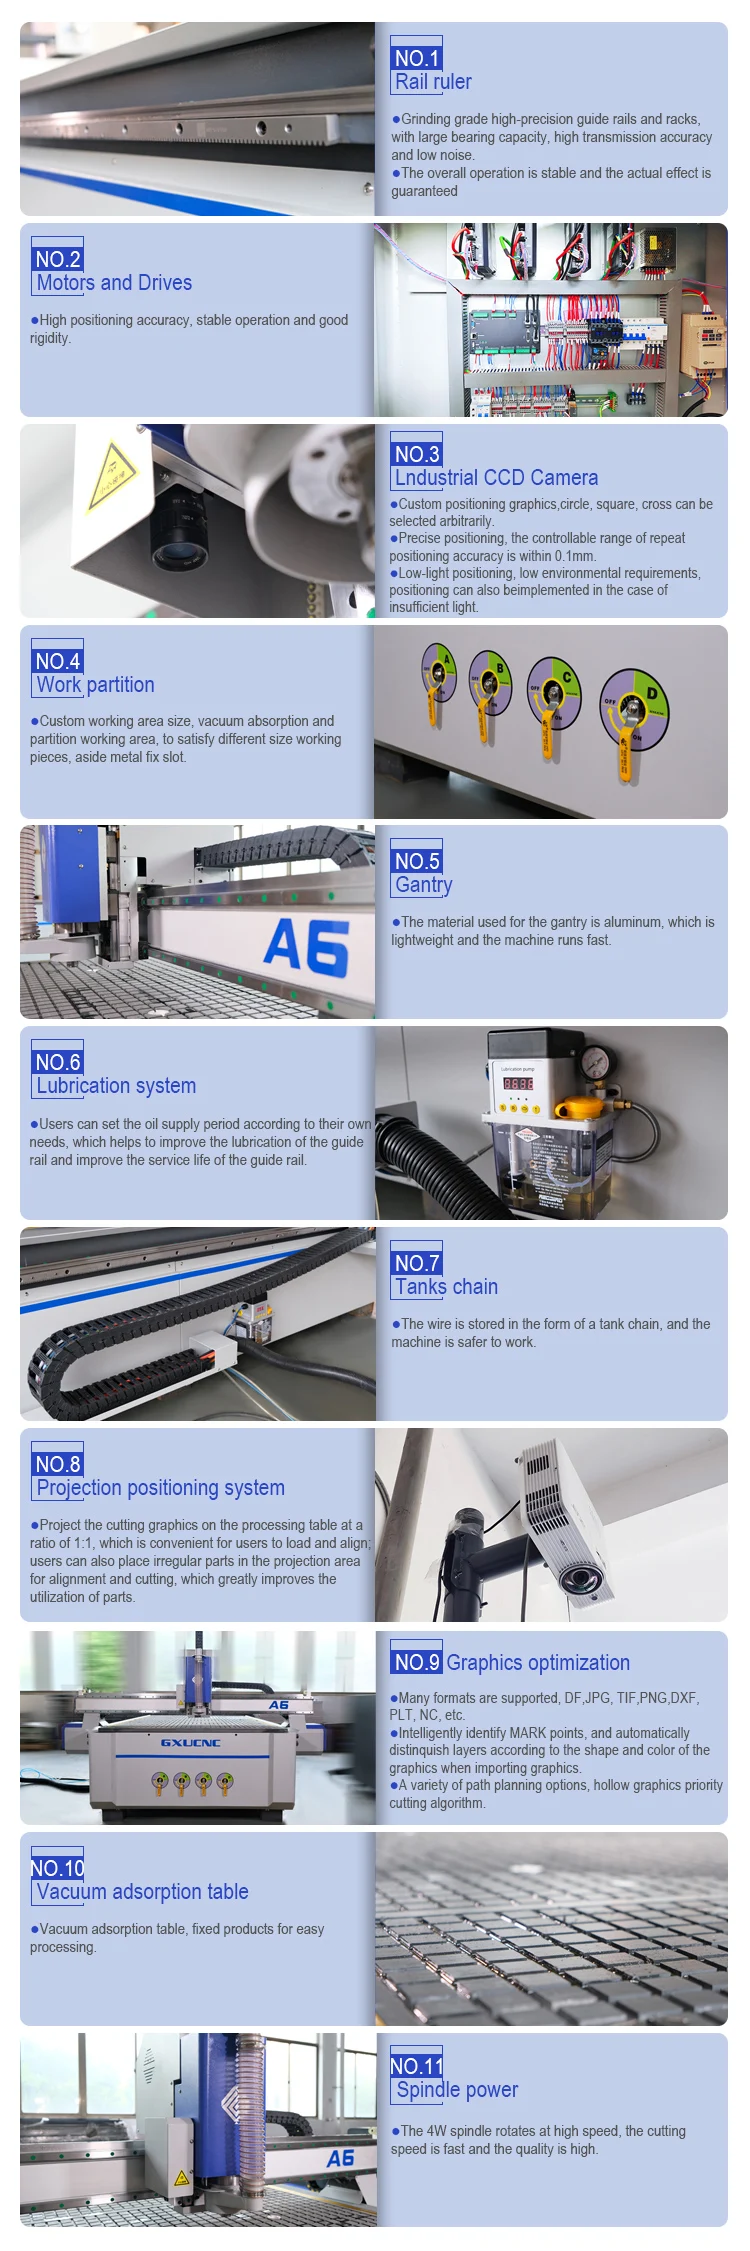 3 Axis 4 Axis 5 Axis Cnc Router Machining Size Customized Mini Cnc Router Engraving Machine